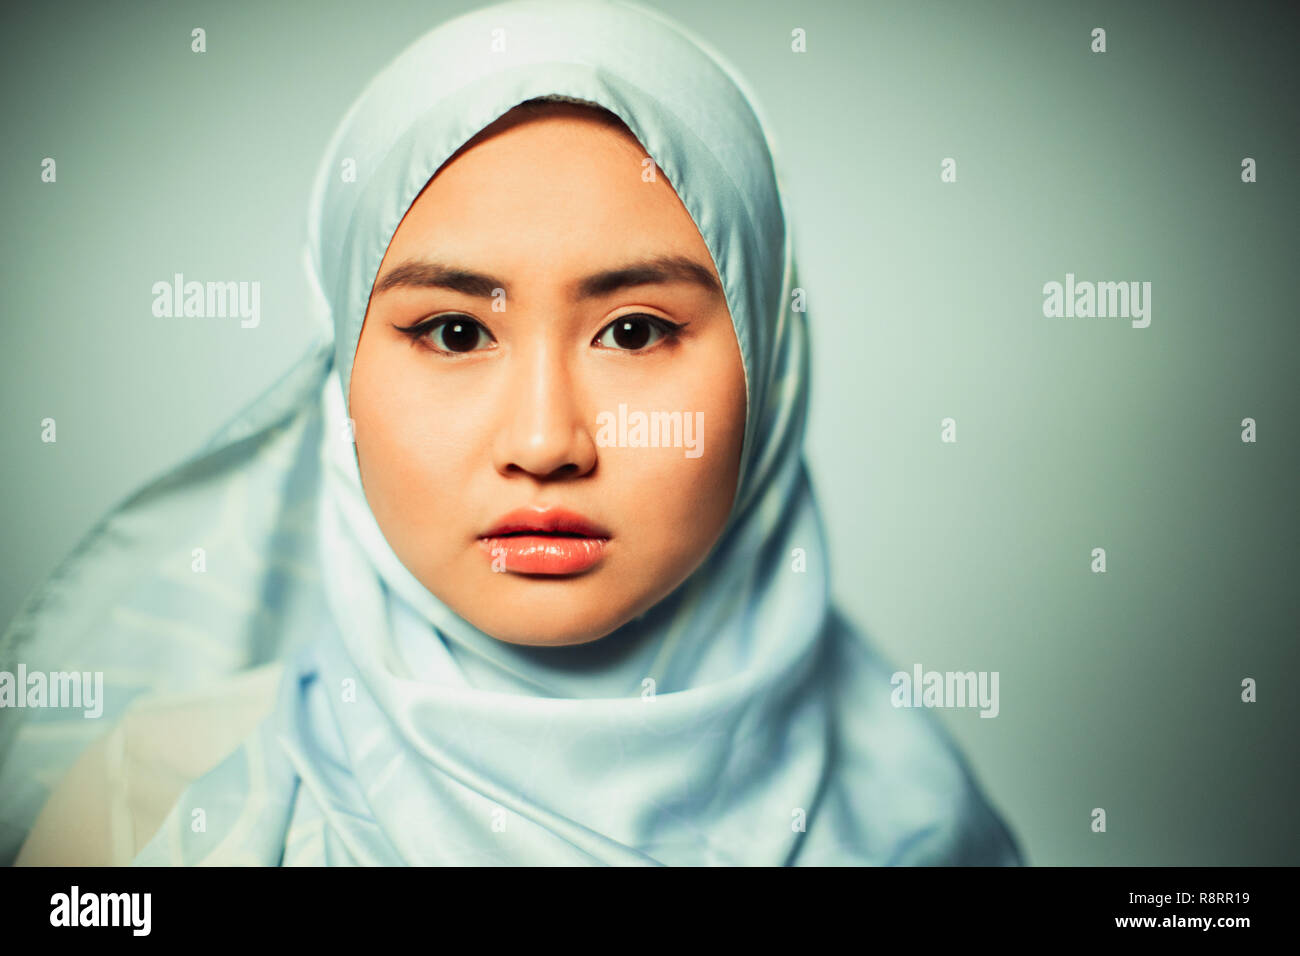 Portrait confident, serious young woman wearing blue silk hijab Stock Photo